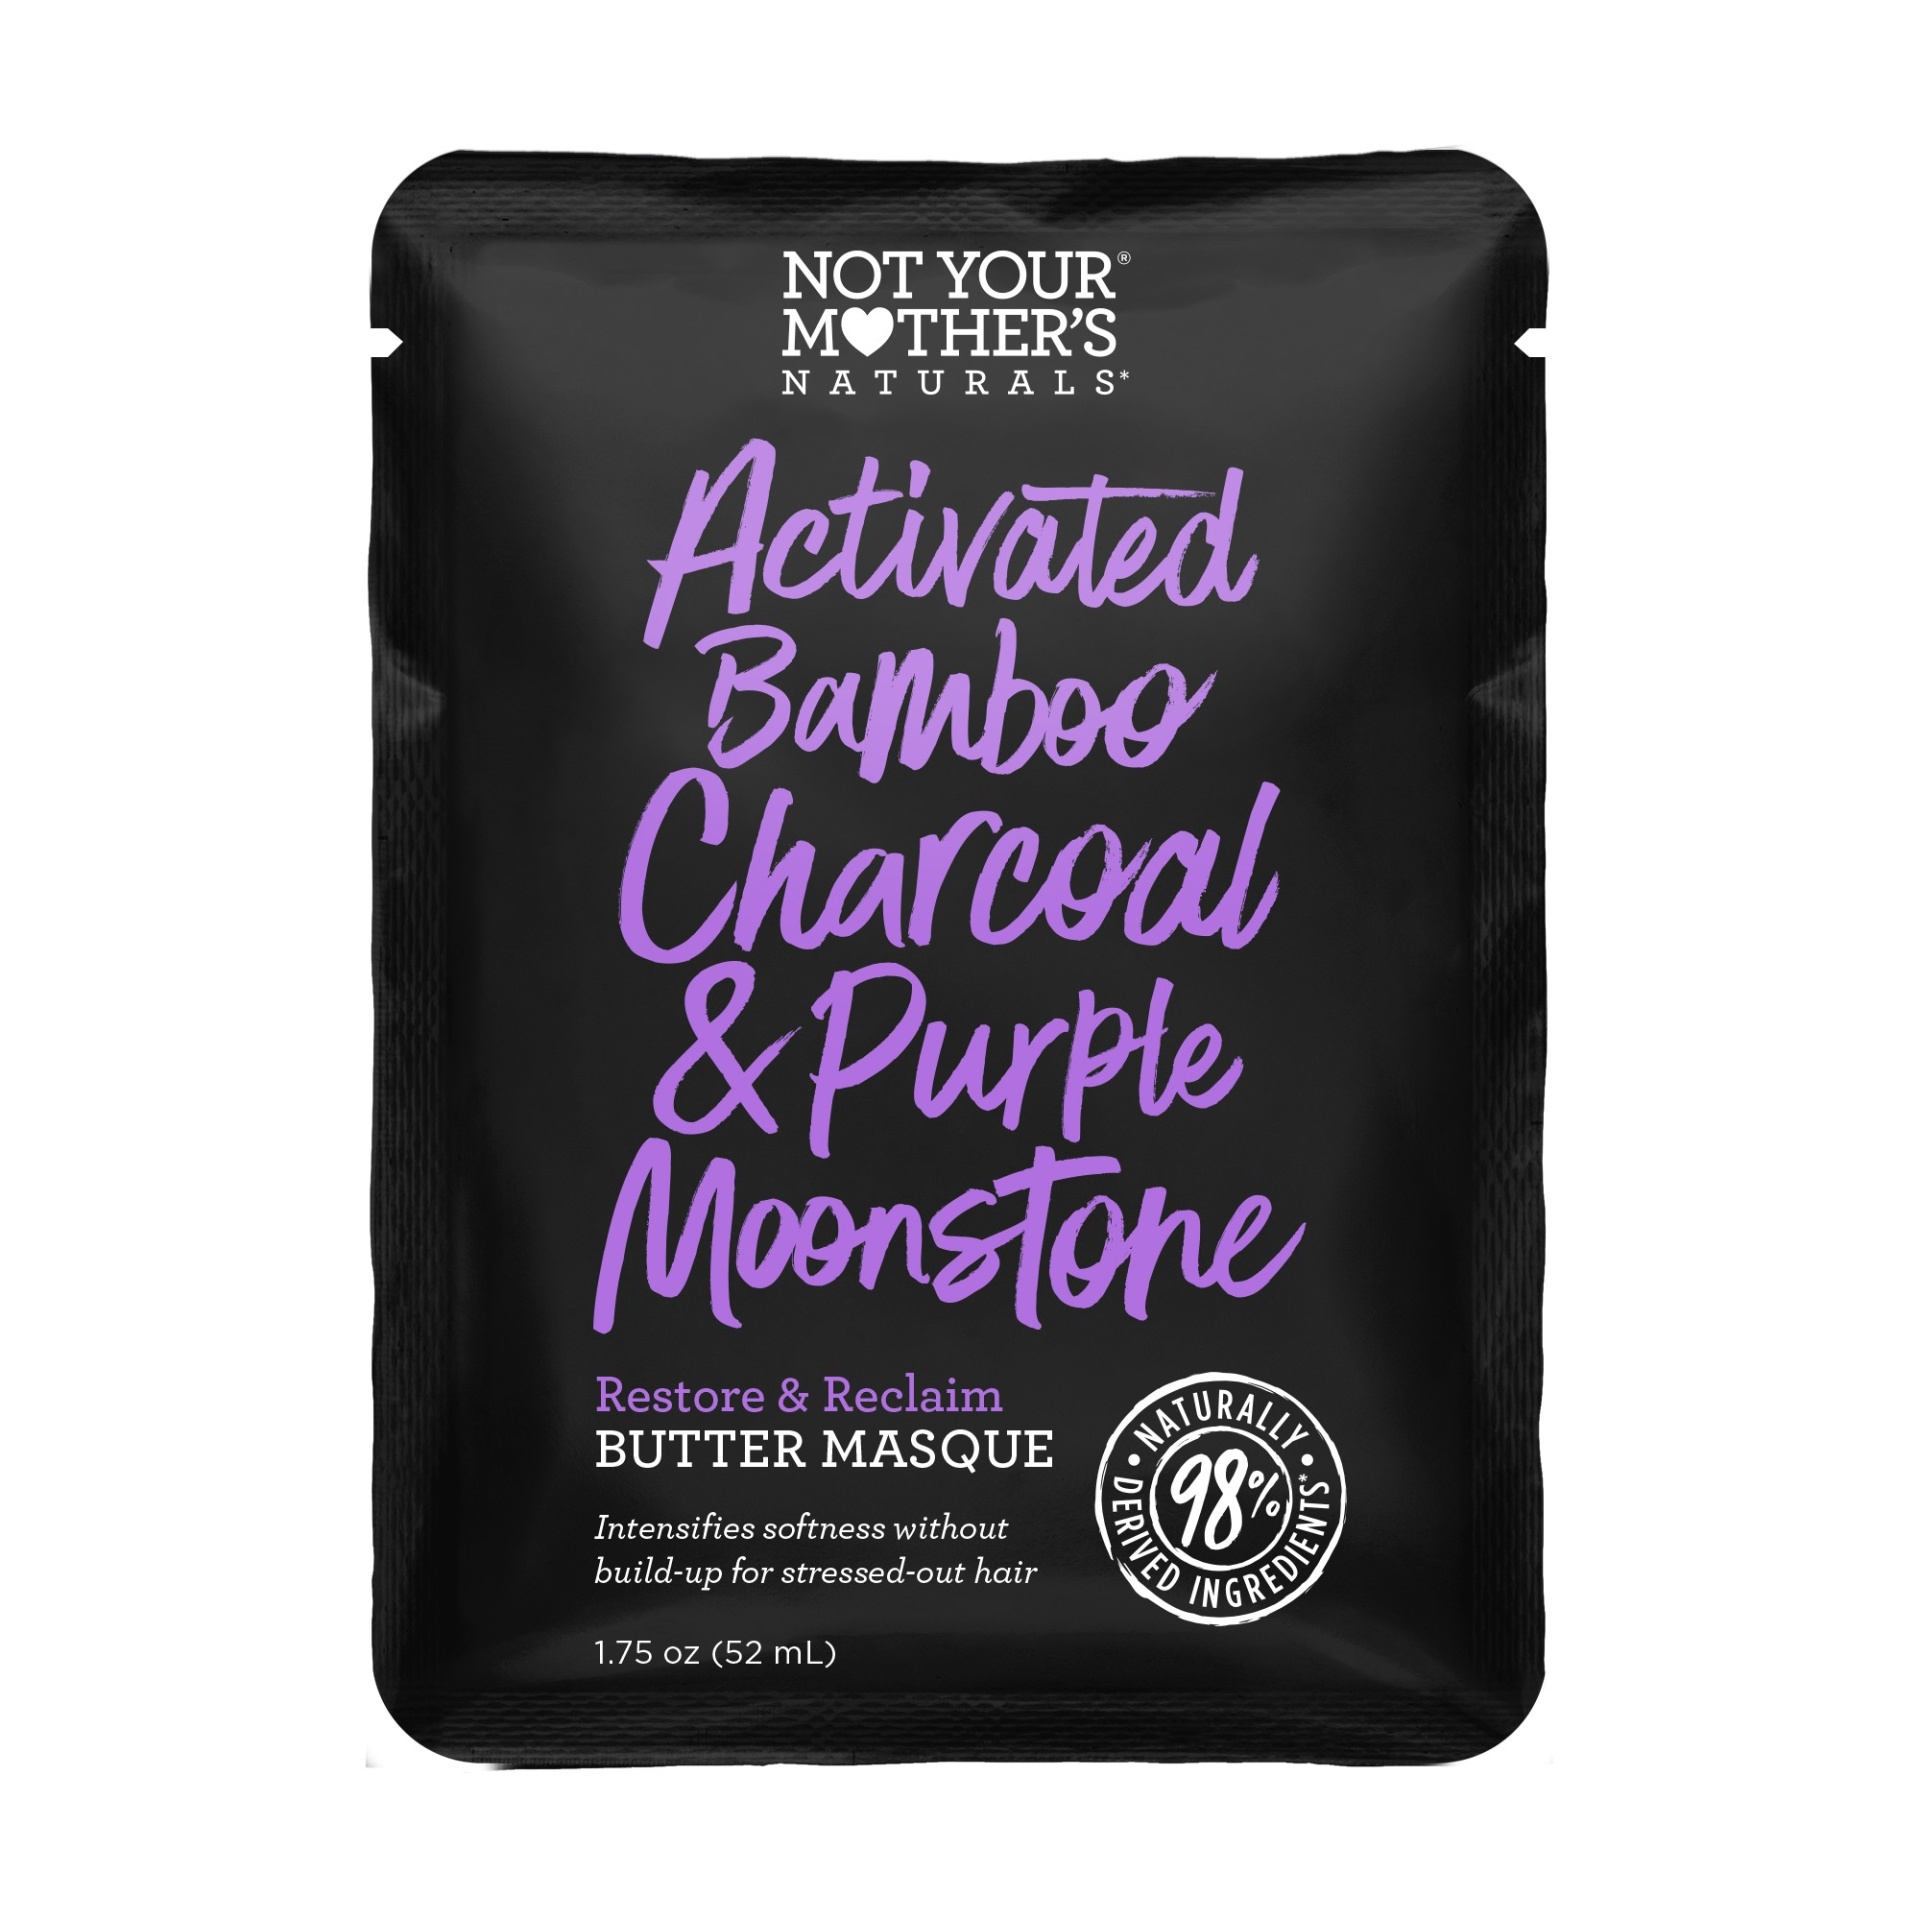 slide 1 of 2, Not Your Mother's Naturals Activated Bamboo Charcoal & Purple Moonstone Butter Masque, 1.75 fl oz